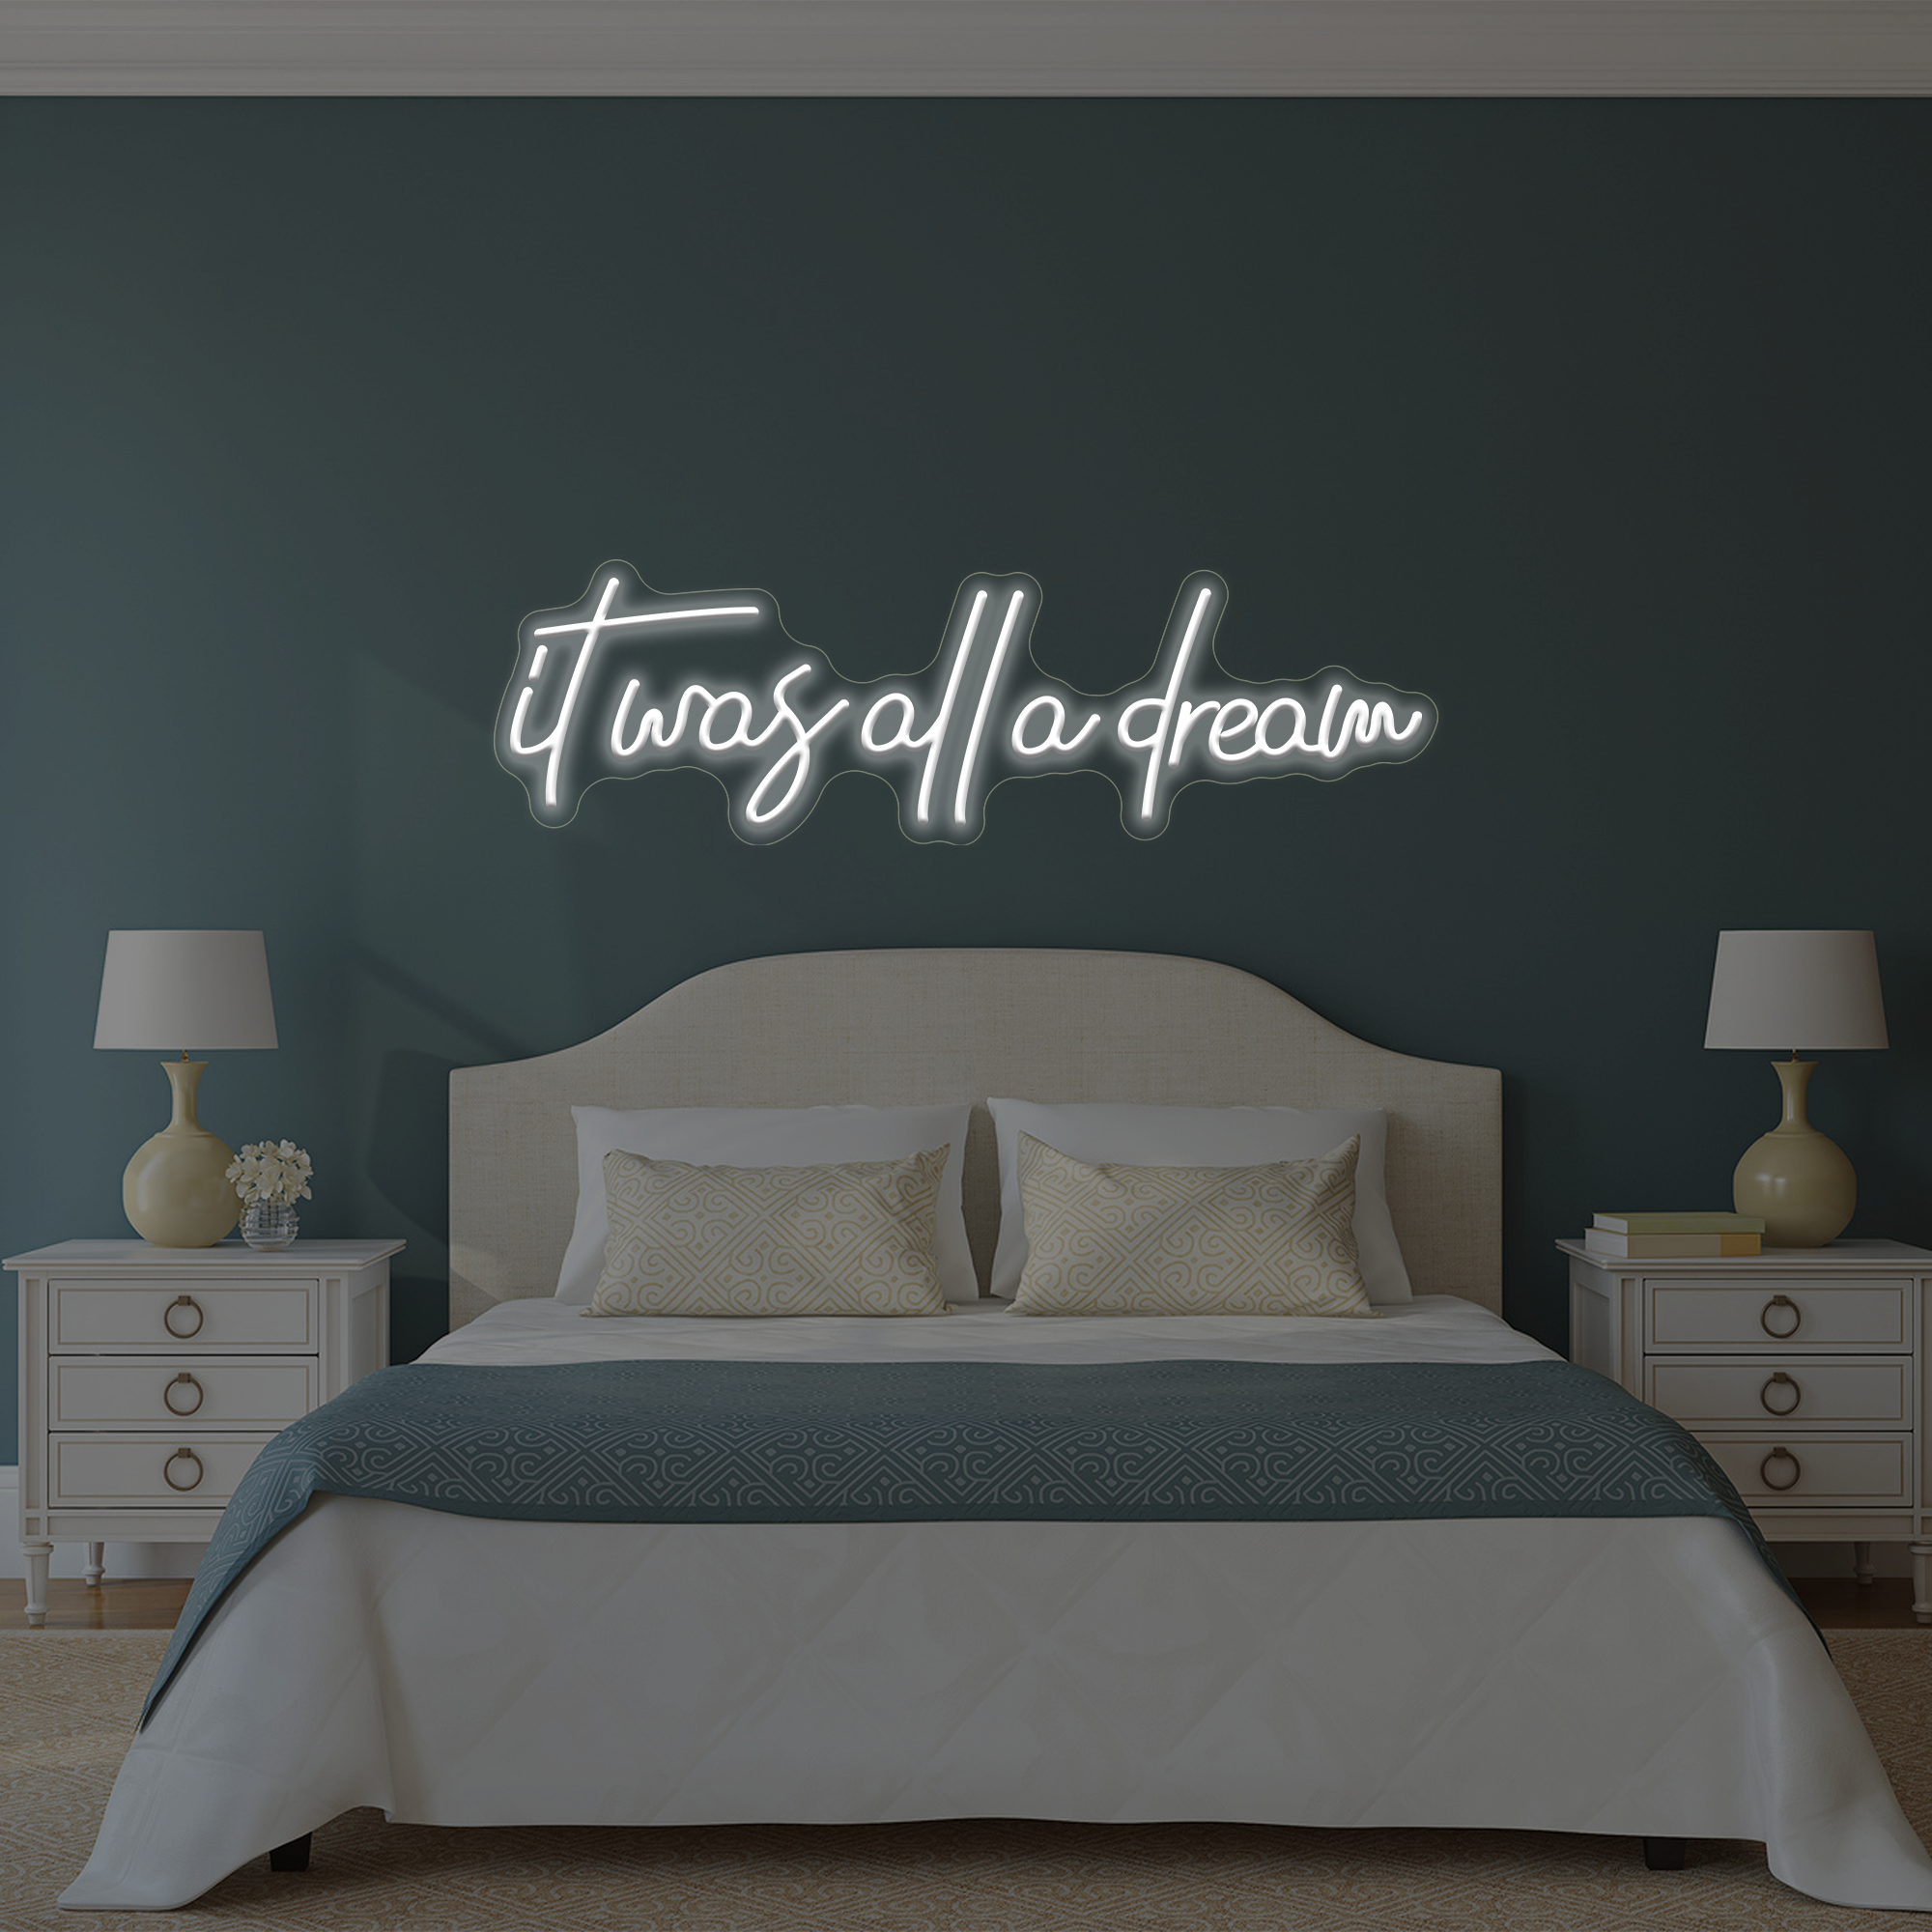 It was all a dream - Neon Sign-MHneonsign